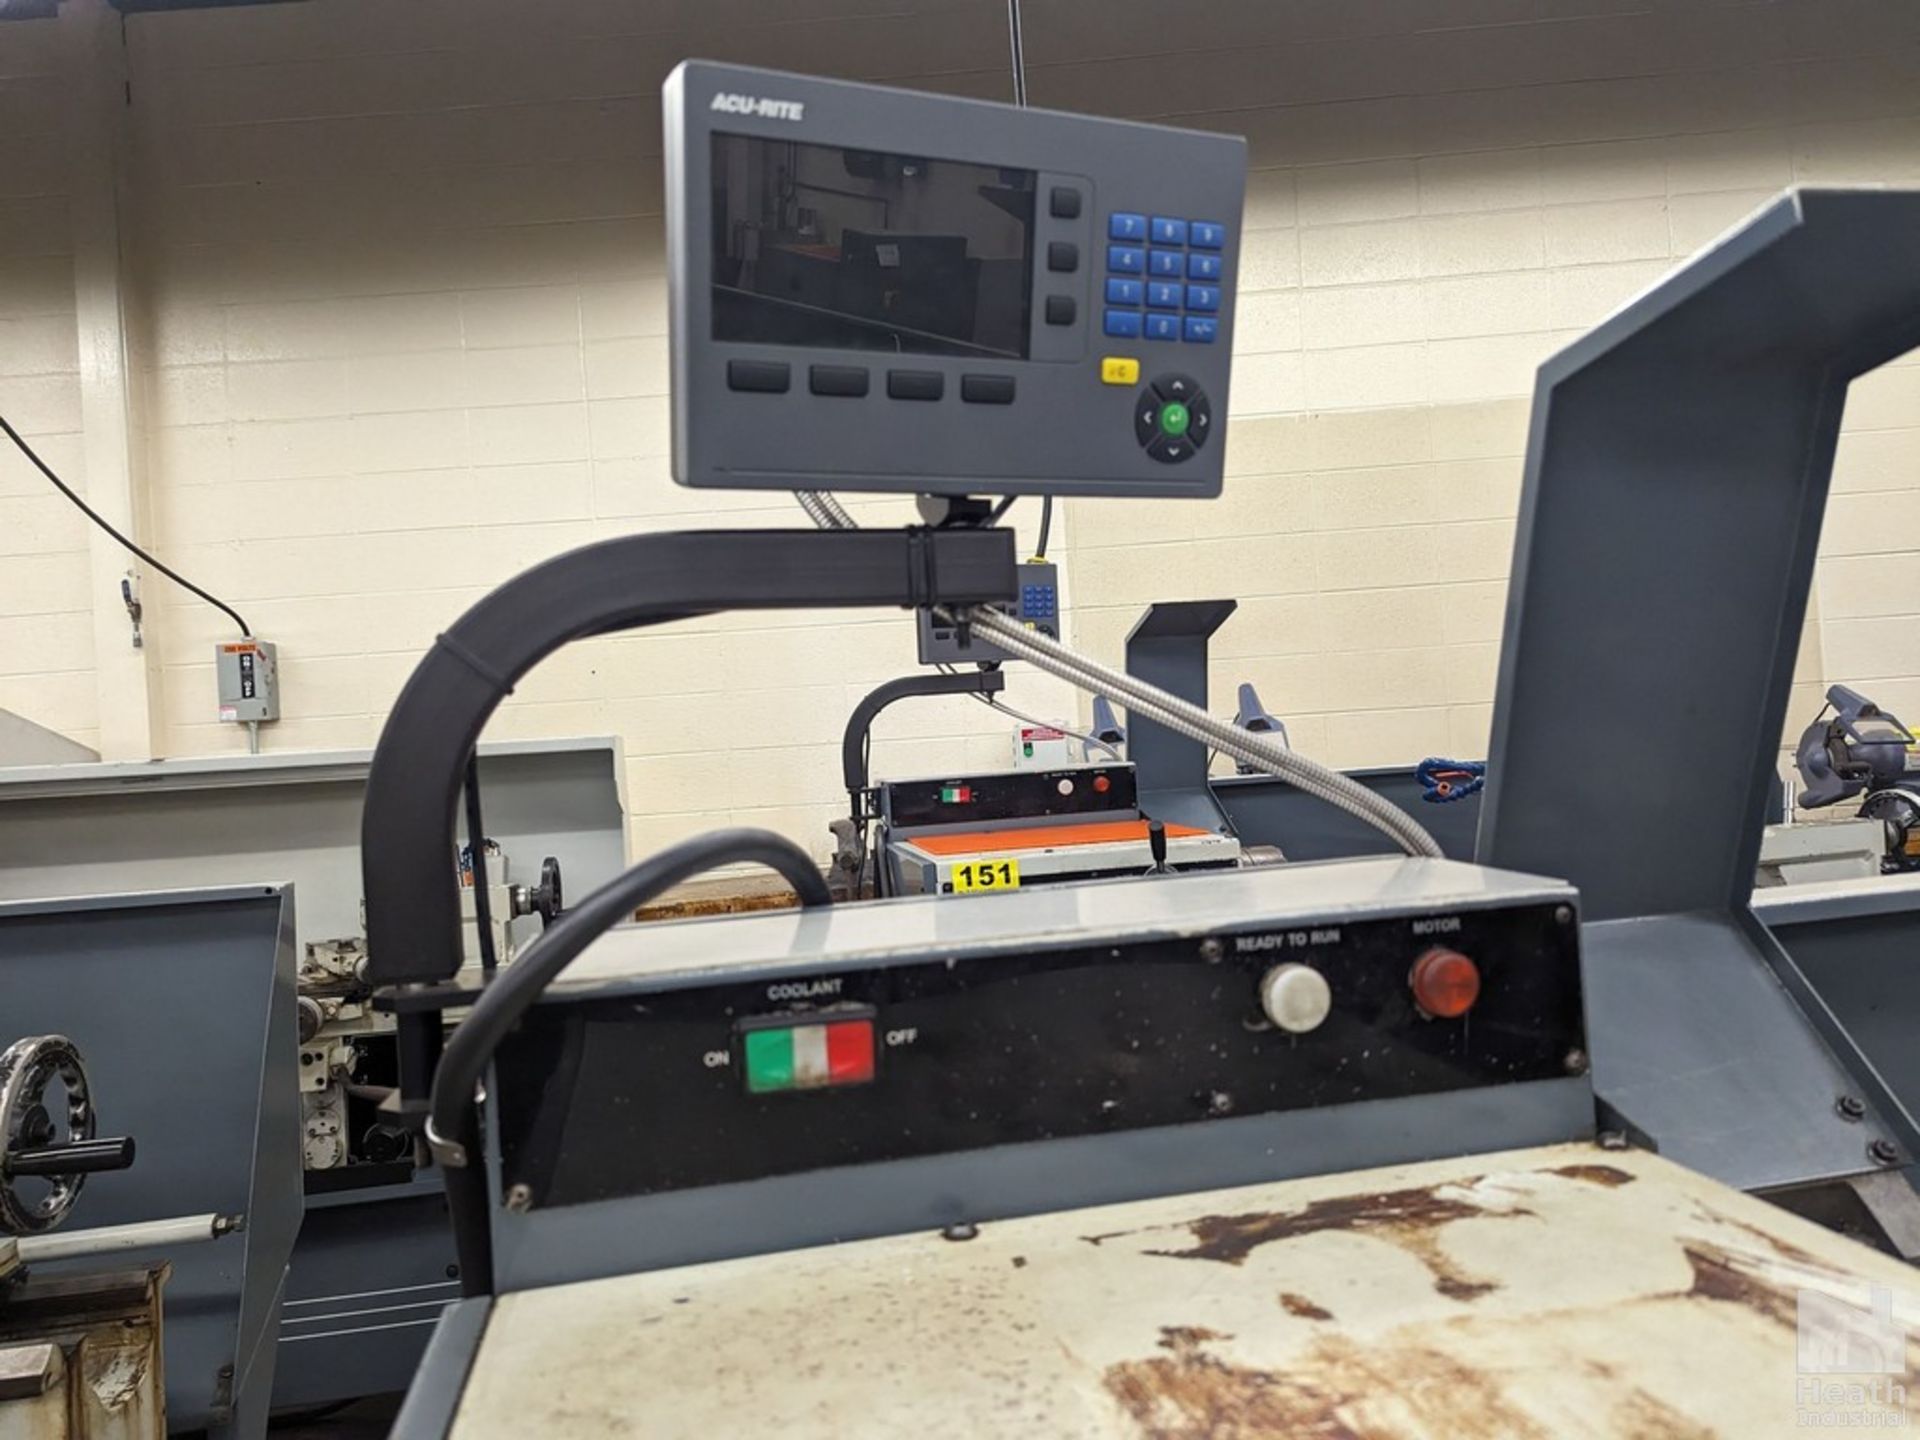 CLAUSING-METOSA 13"X40" MODEL 1340S TOOLROOM LATHE, S/N 41532, 2500 SPINDLE RPM, WITH TAPER - Image 2 of 6